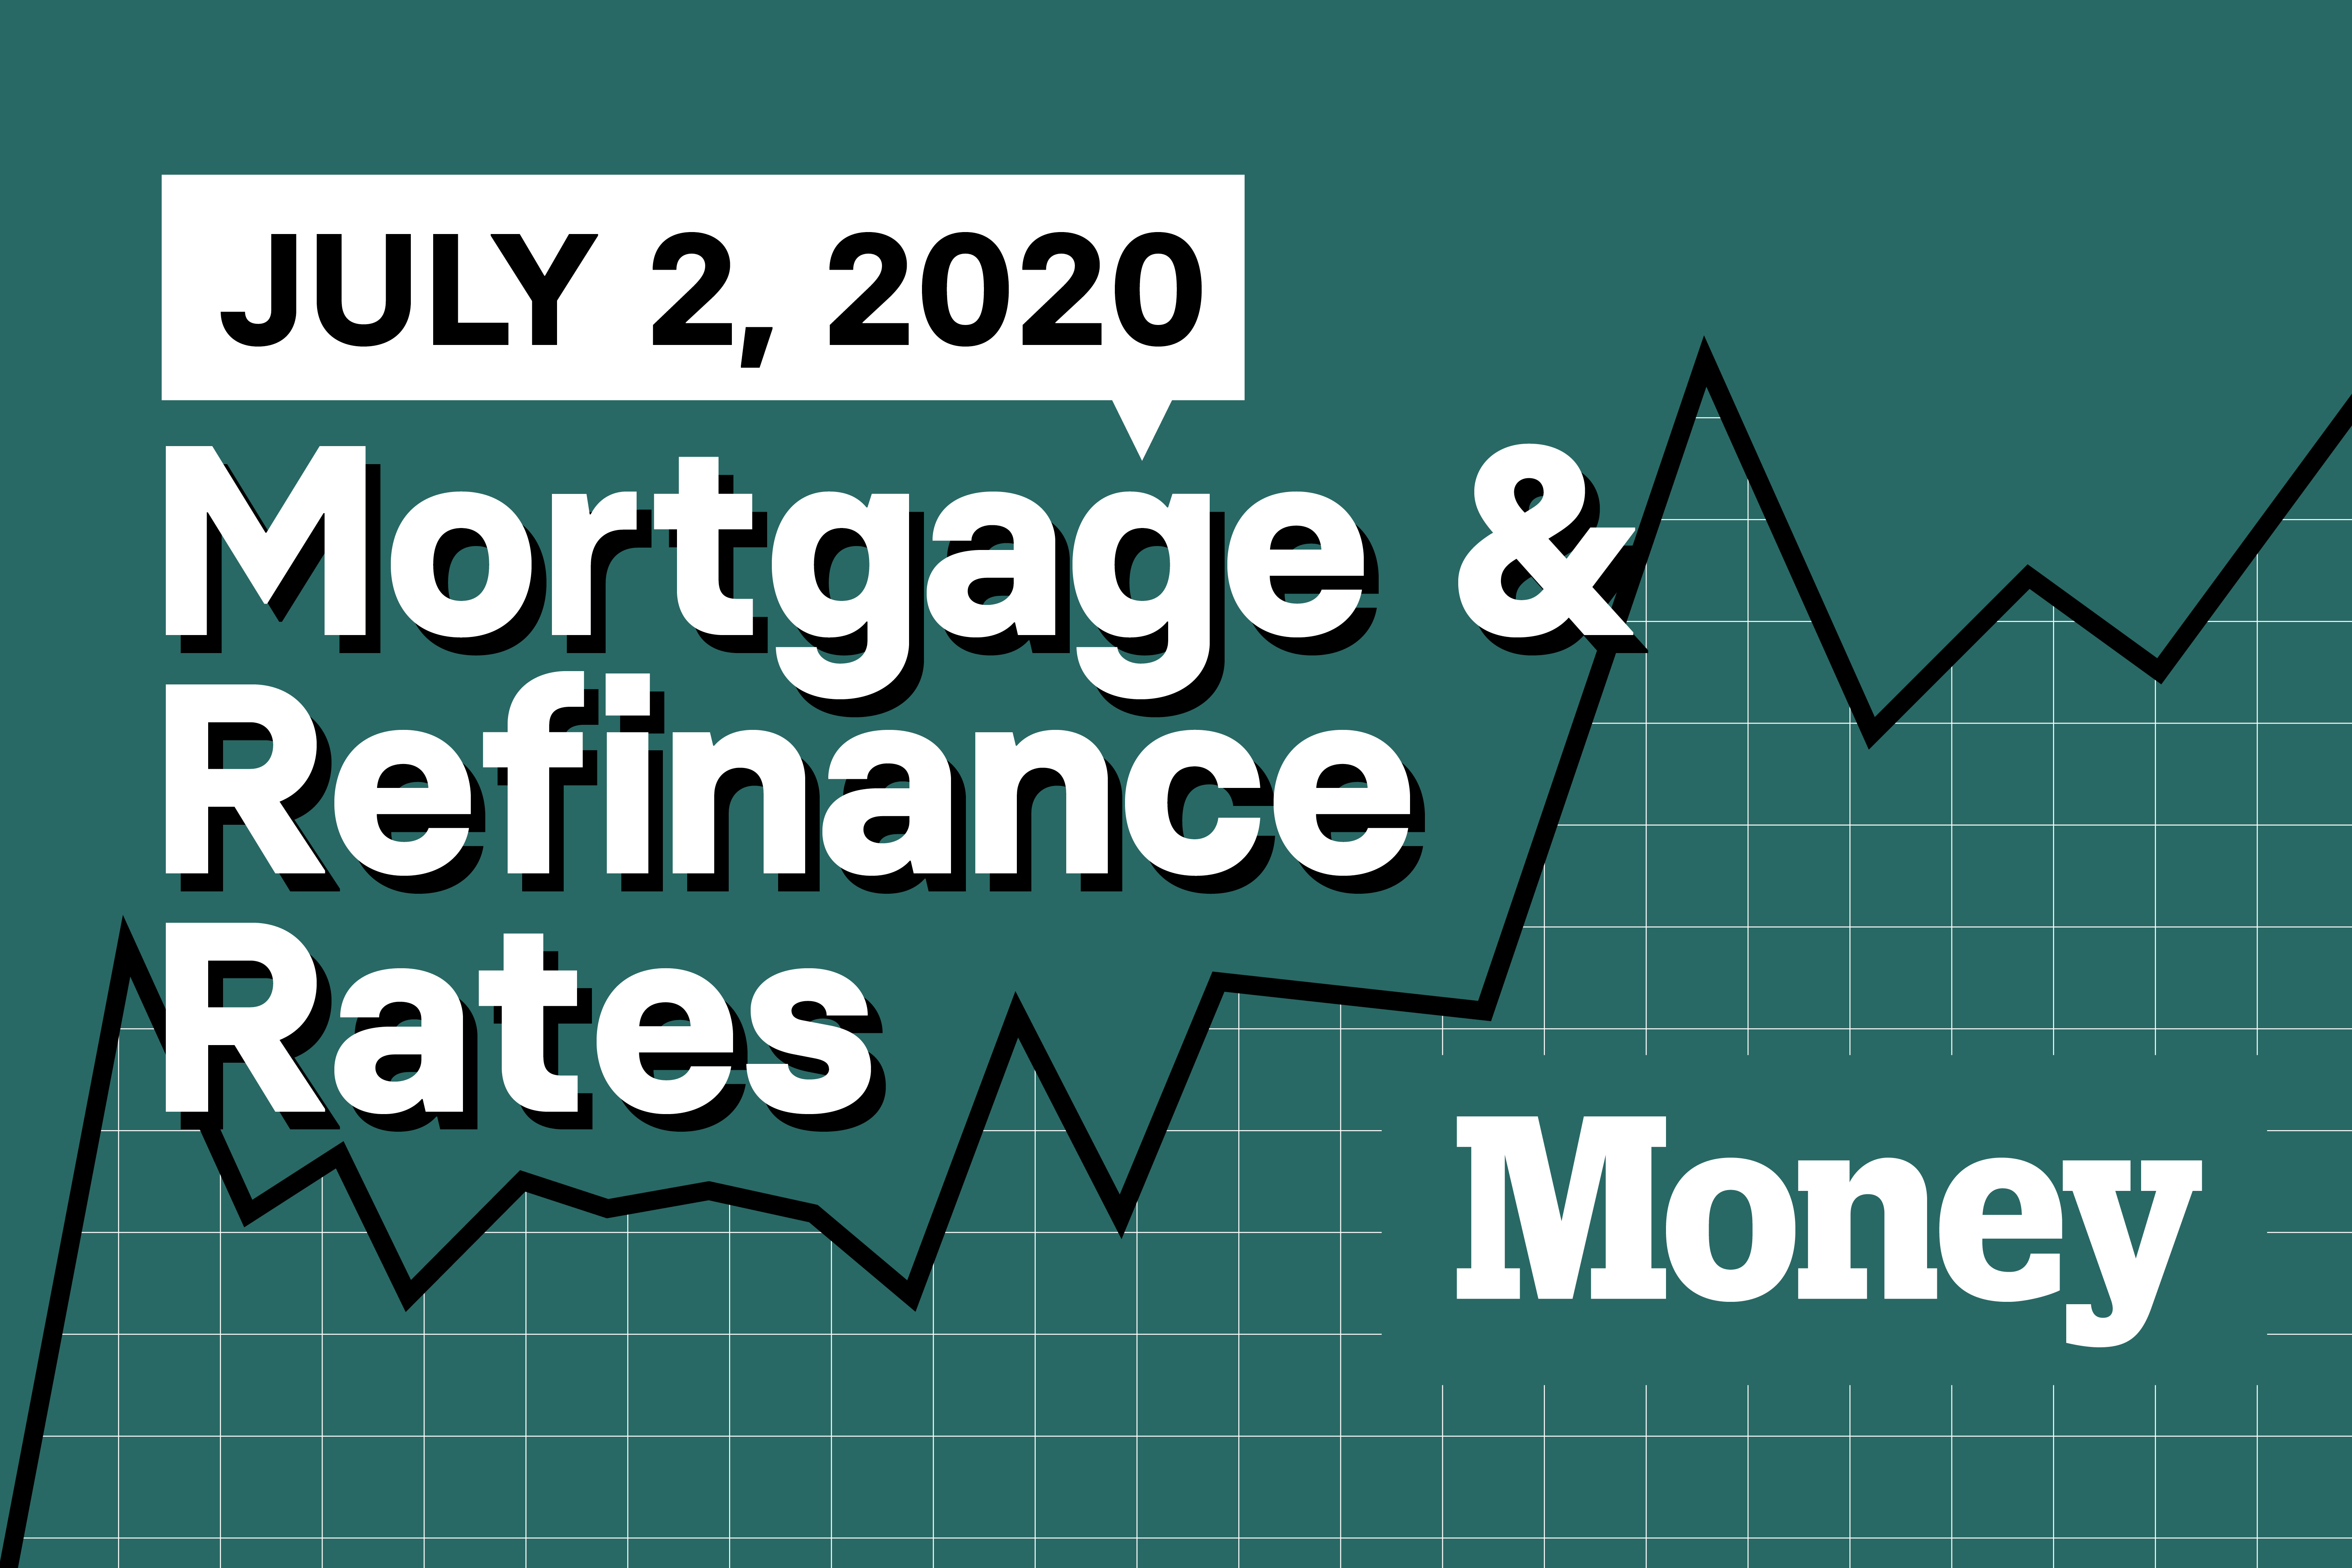 Here Are Today's Mortgage &amp; Refinance Rates for July 2, 2020